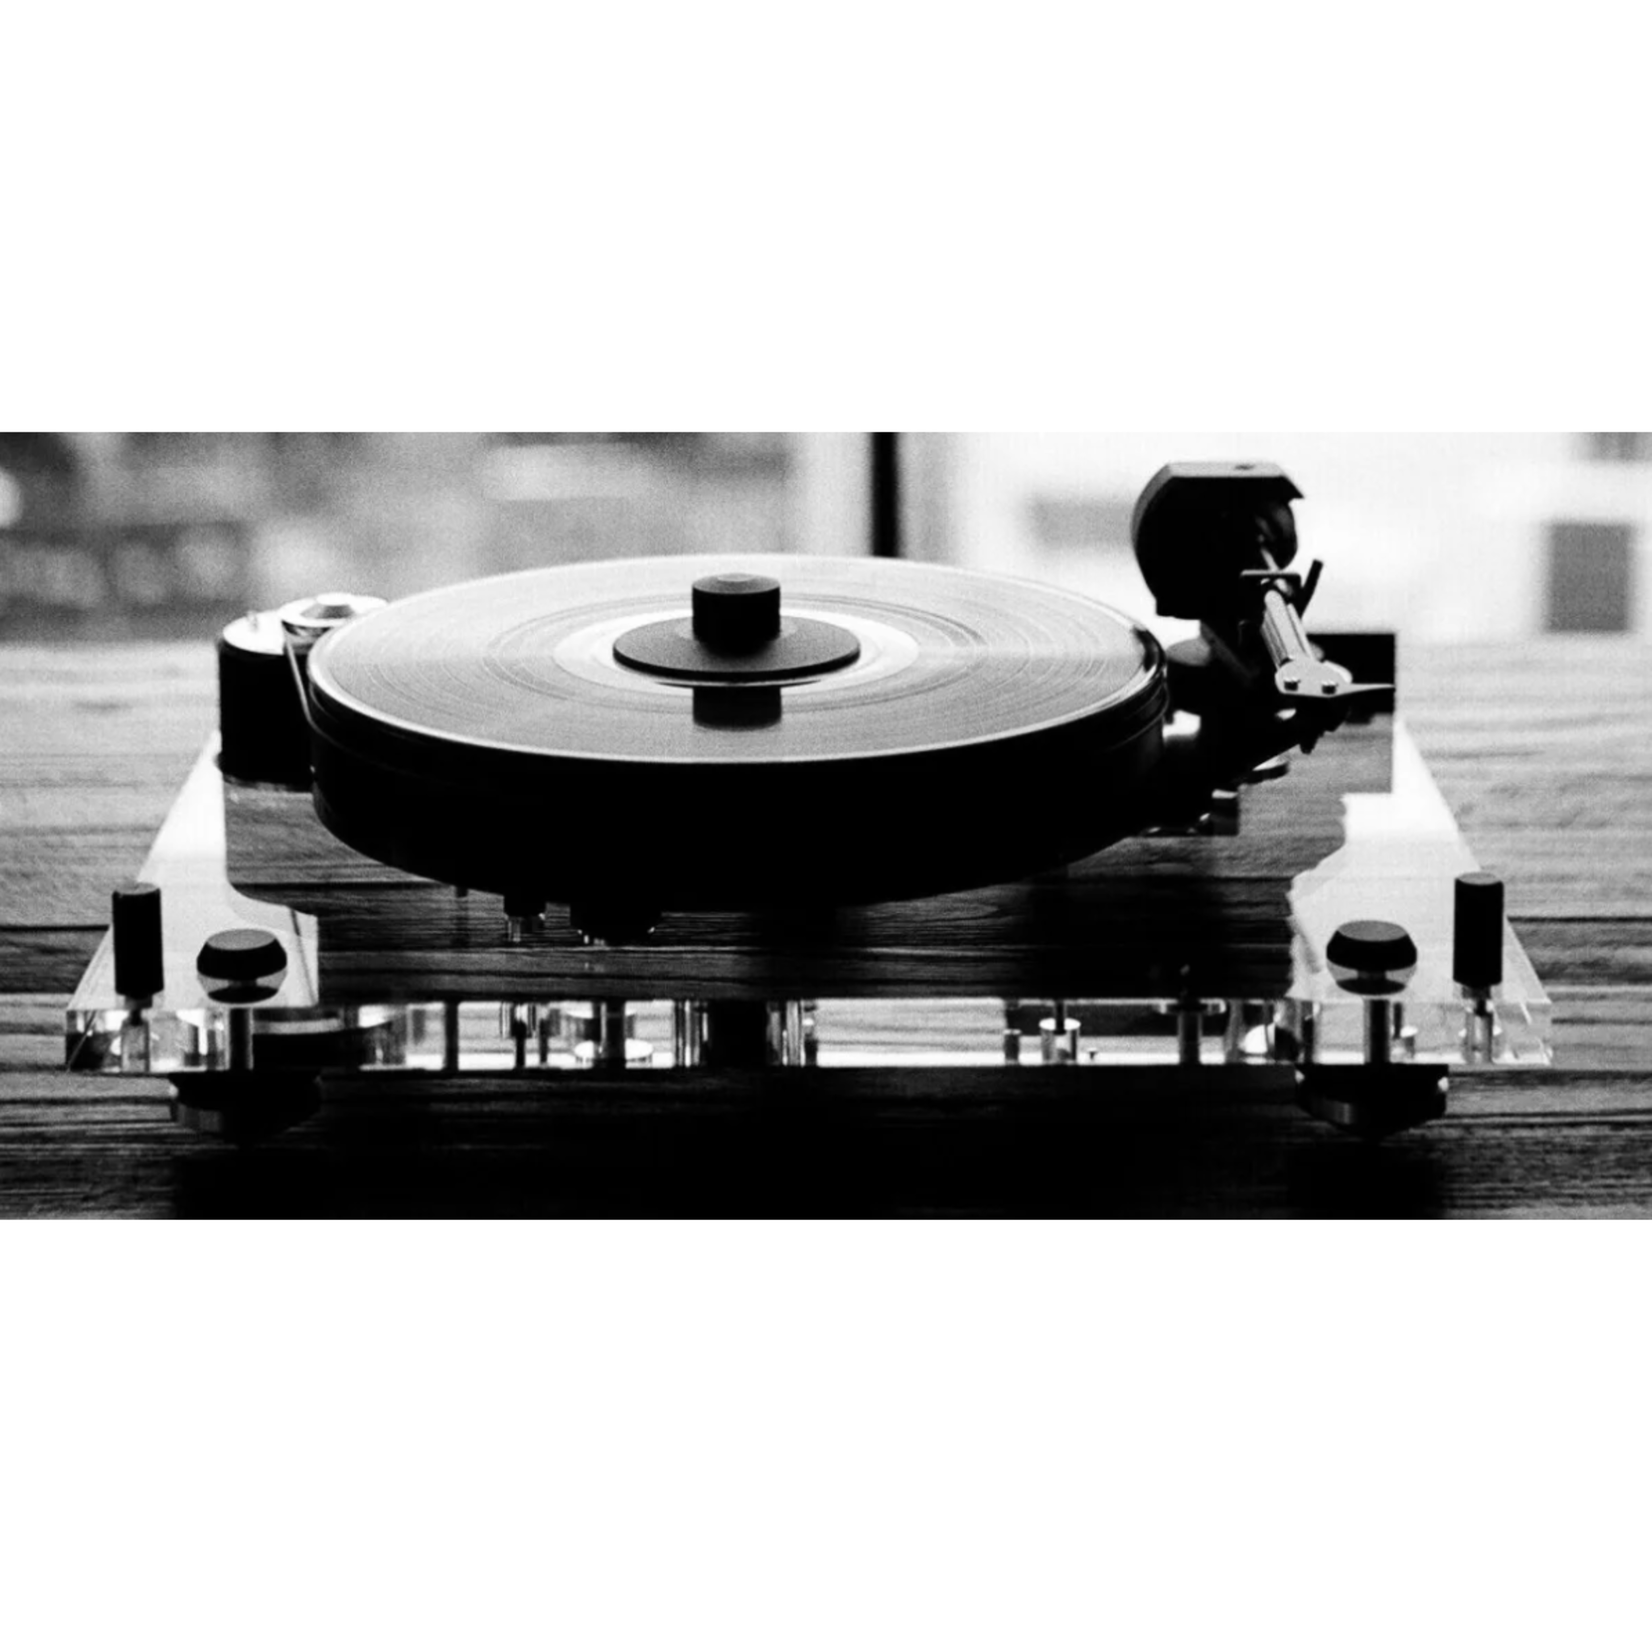 Pro-Ject Pro-ject 6 PerspeX SB turntable with Ortofon Quintet Blue Cartridge